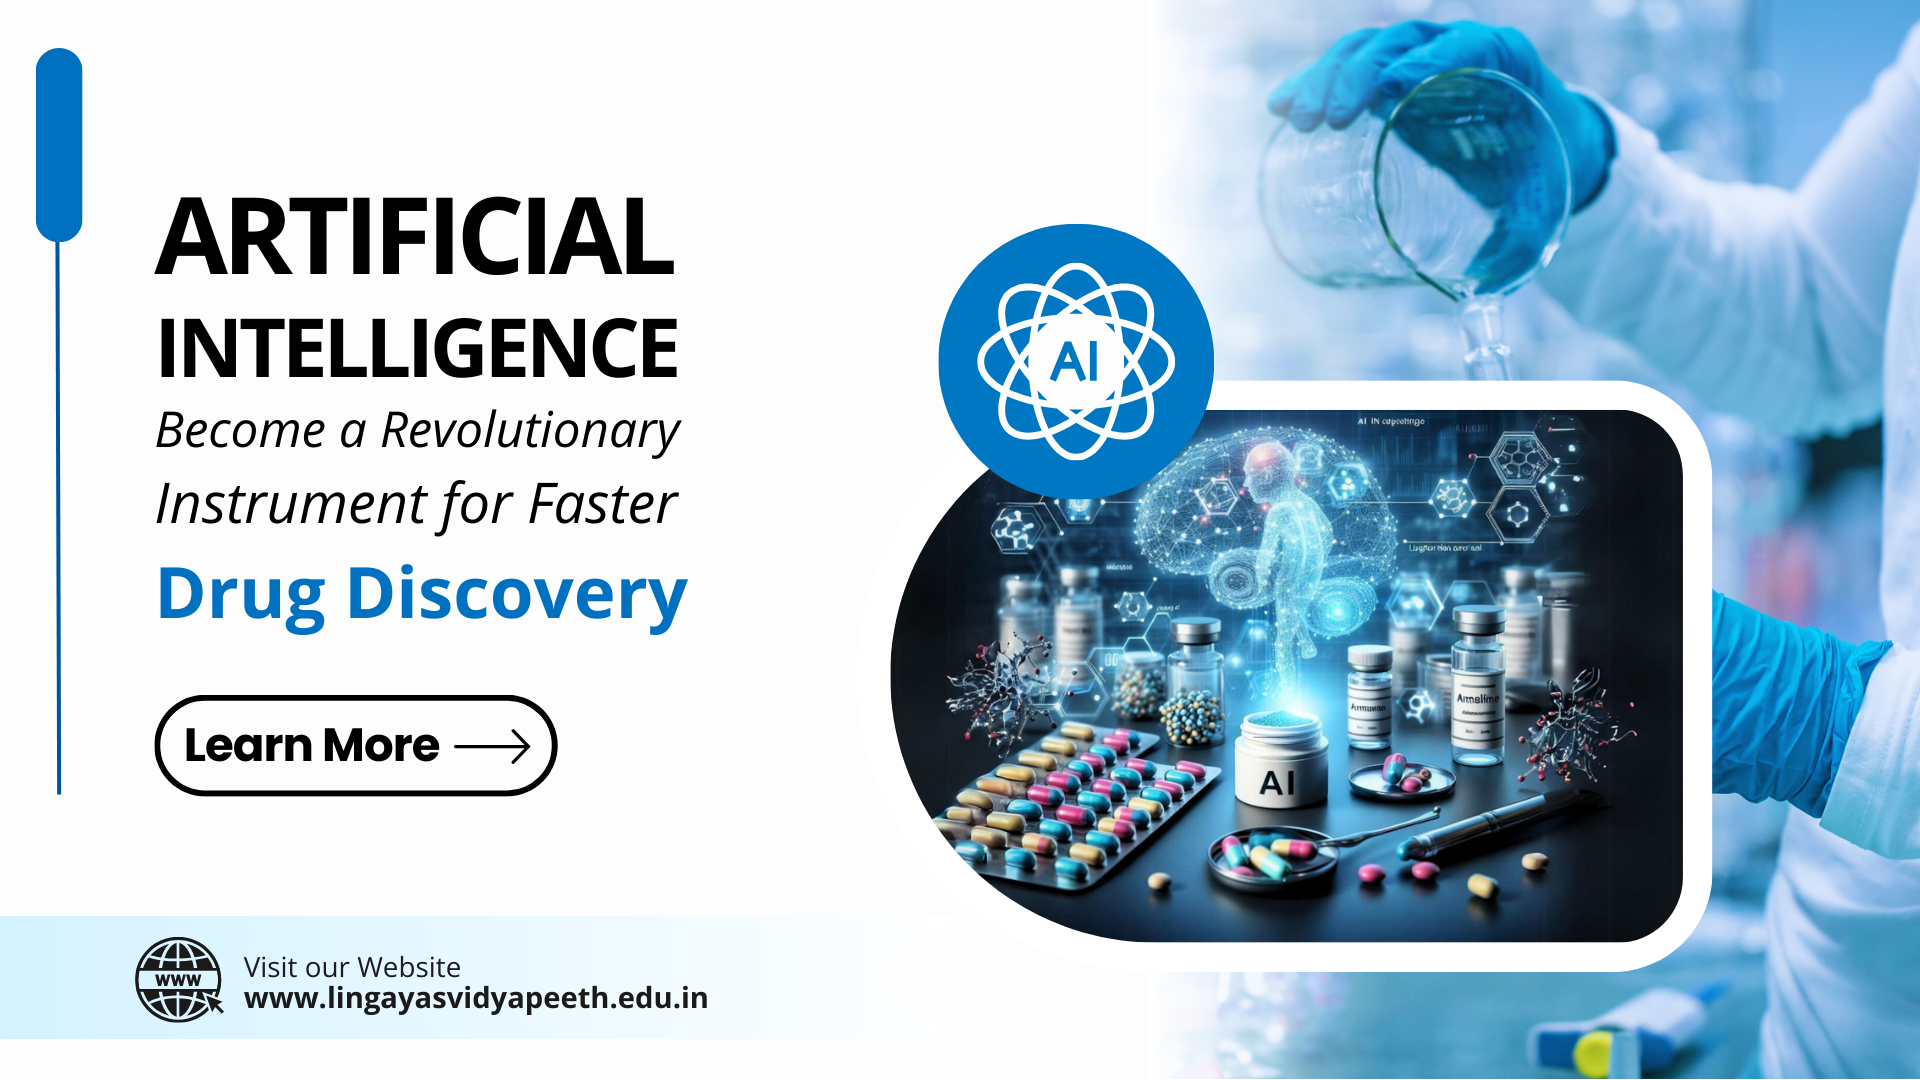 Can AI (Artificial Intelligence) Become a Revolutionary Instrument for Faster Drug Discovery?